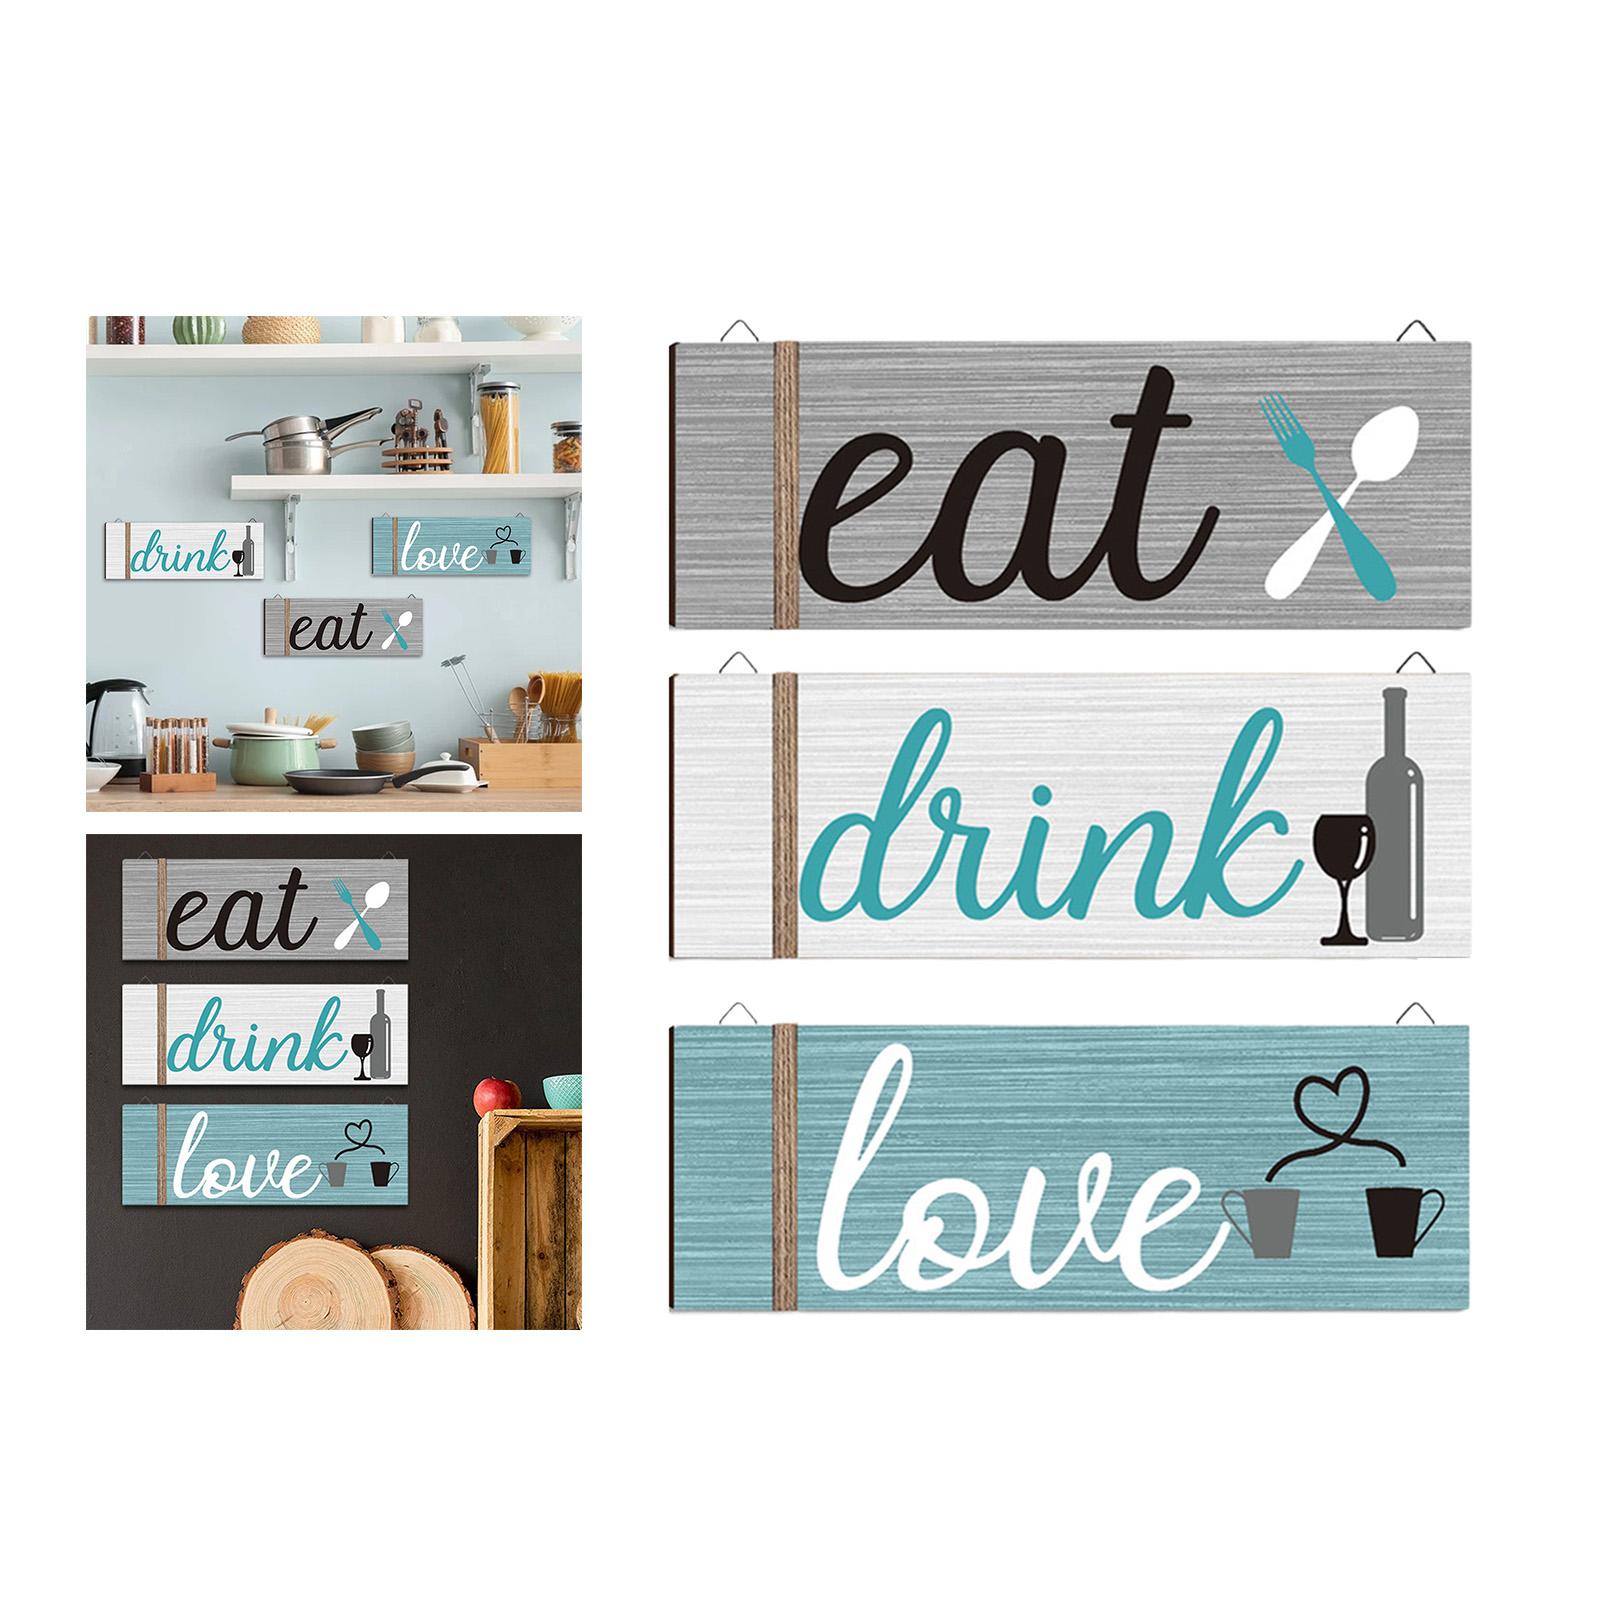 3 Pieces Rustic Wooden Sign Home Decor Plaque Wall Hanging Ornament Set 1